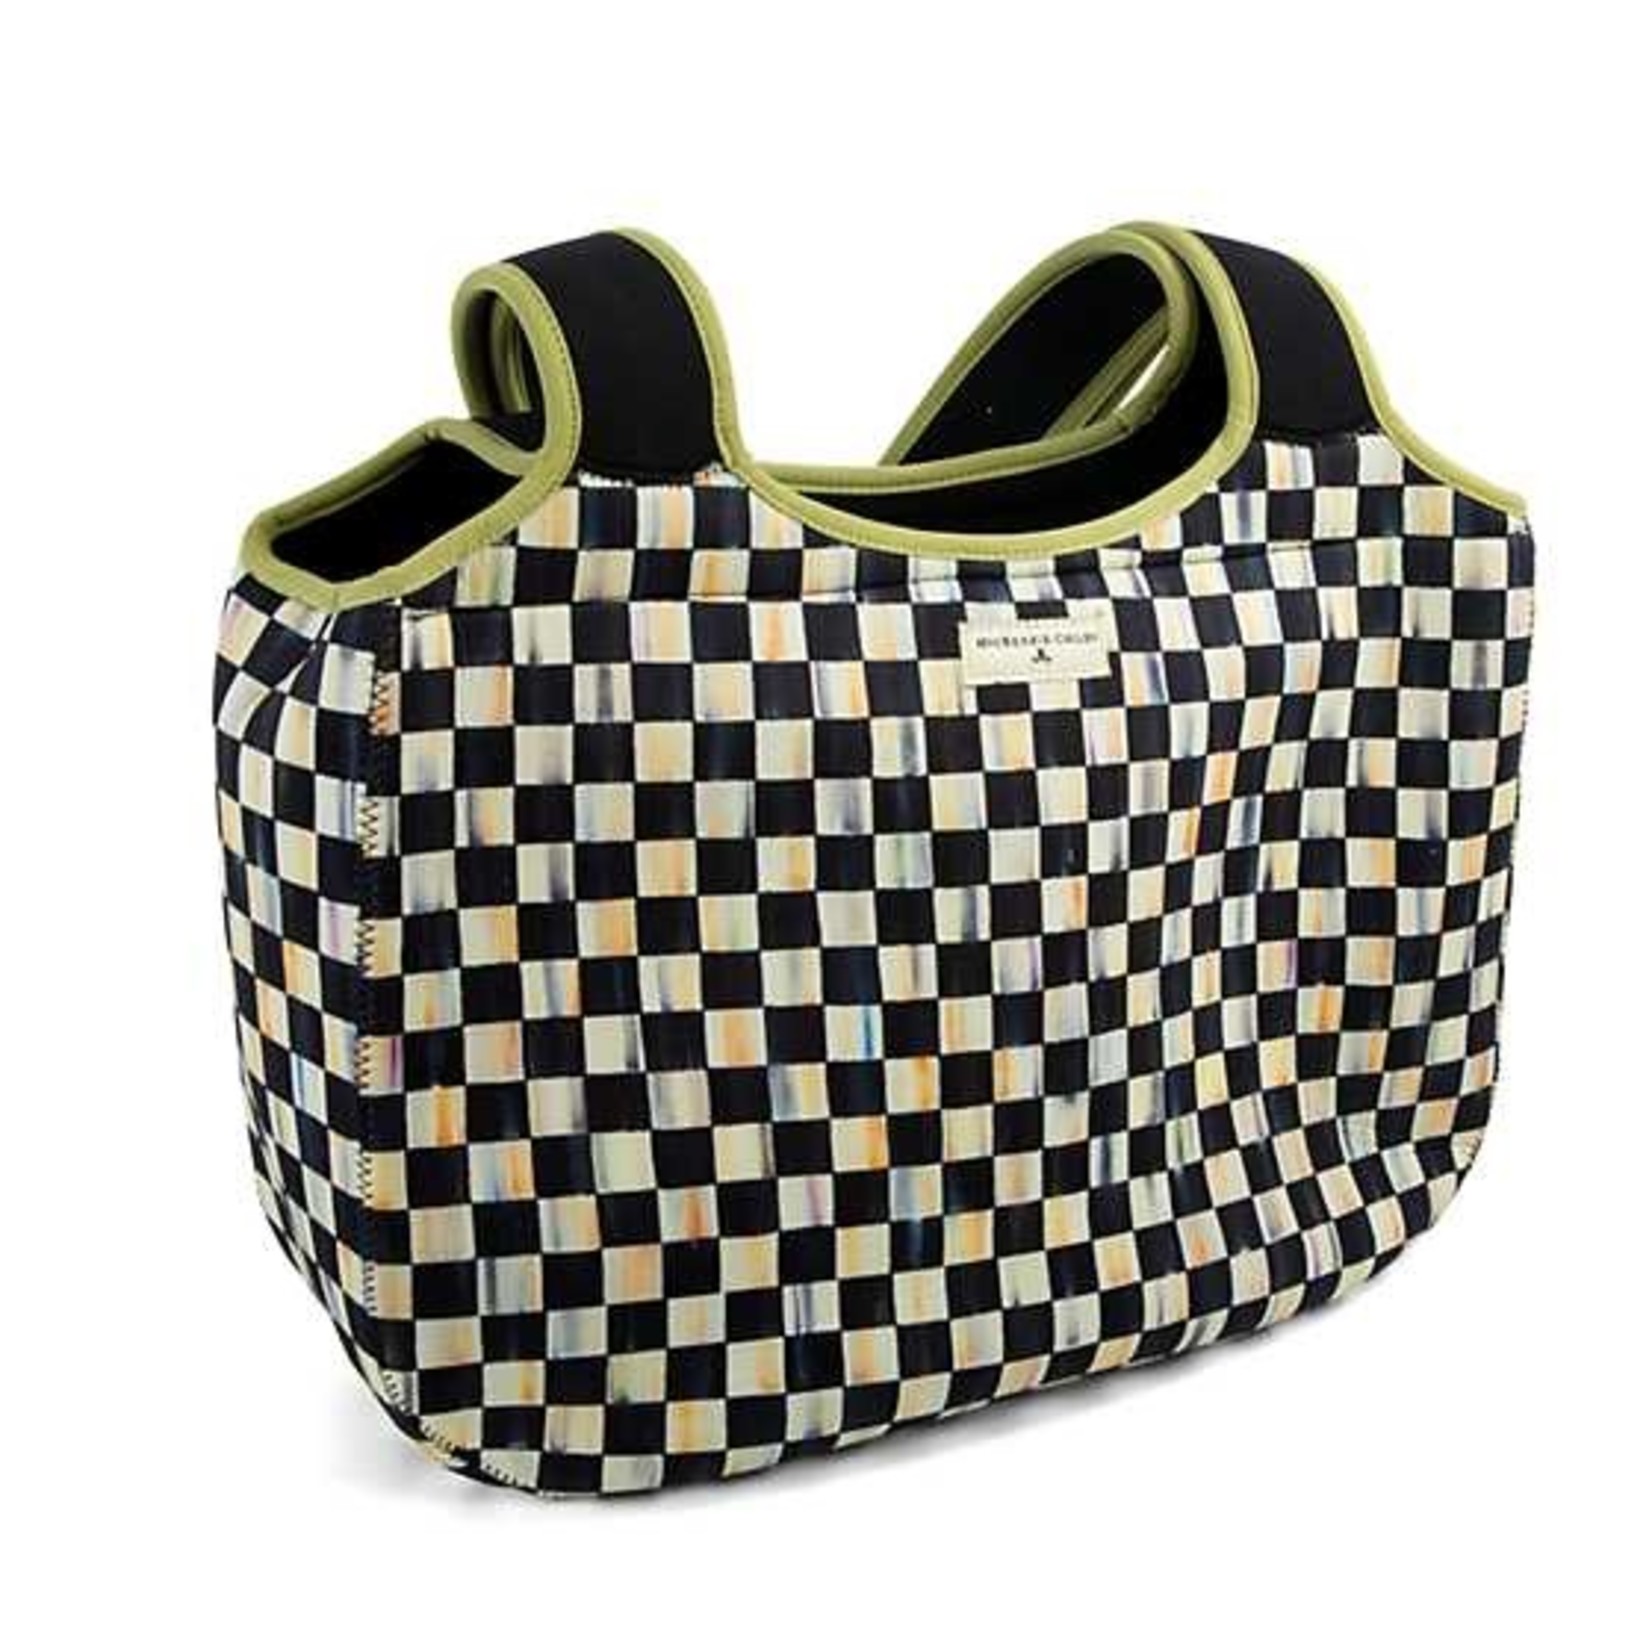 MacKenzie Childs Courtly Check Carryall